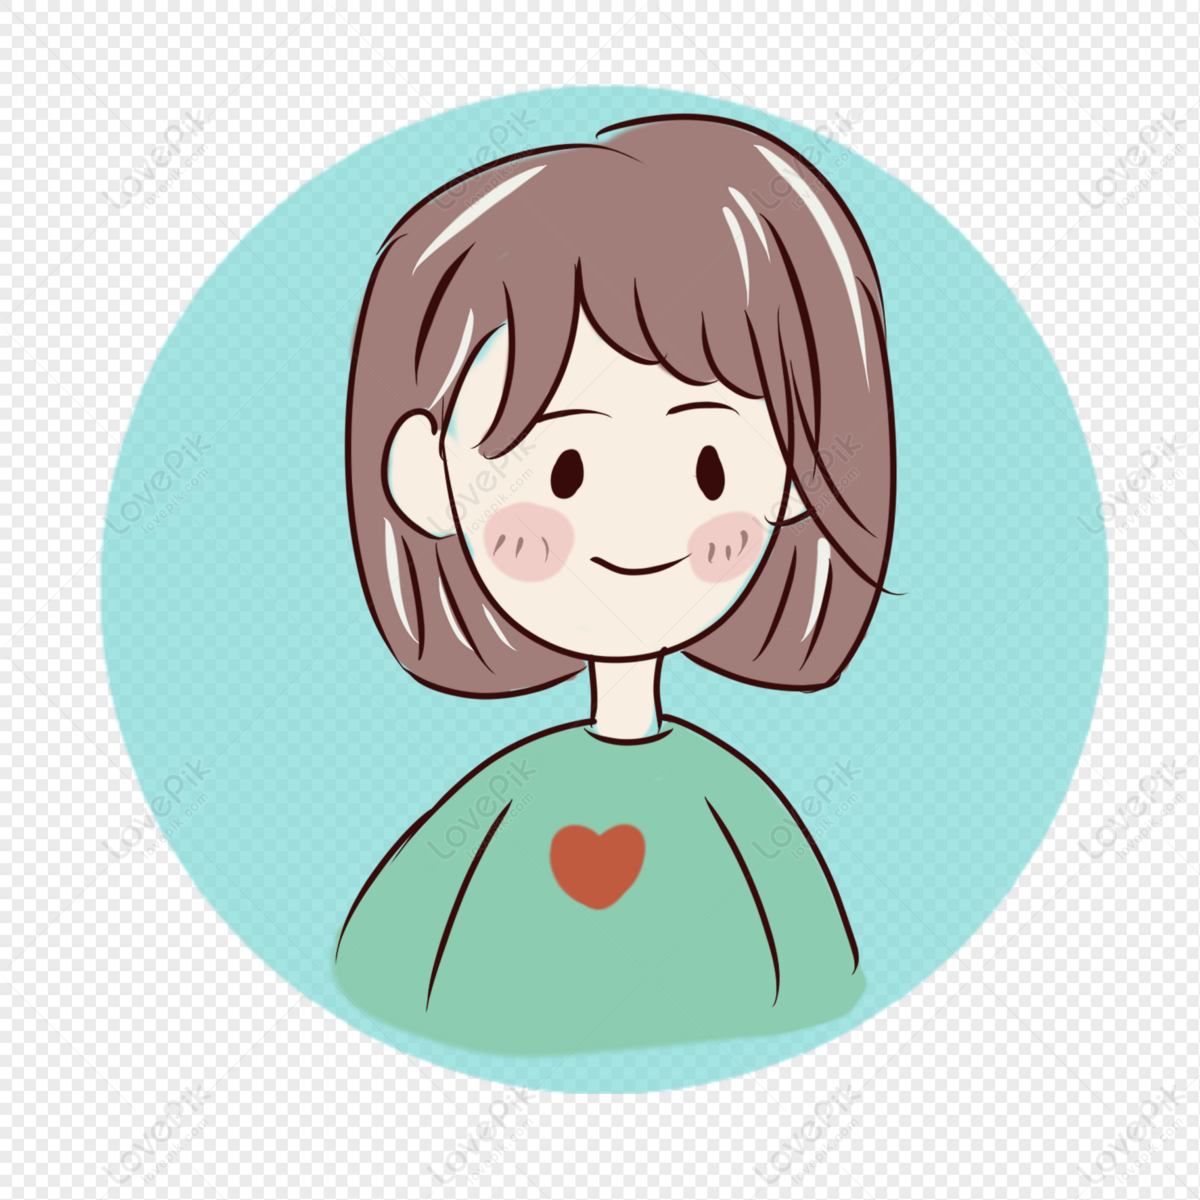 Cartoon Girl PNG Transparent And Clipart Image For Free Download - Lovepik  | 401205326